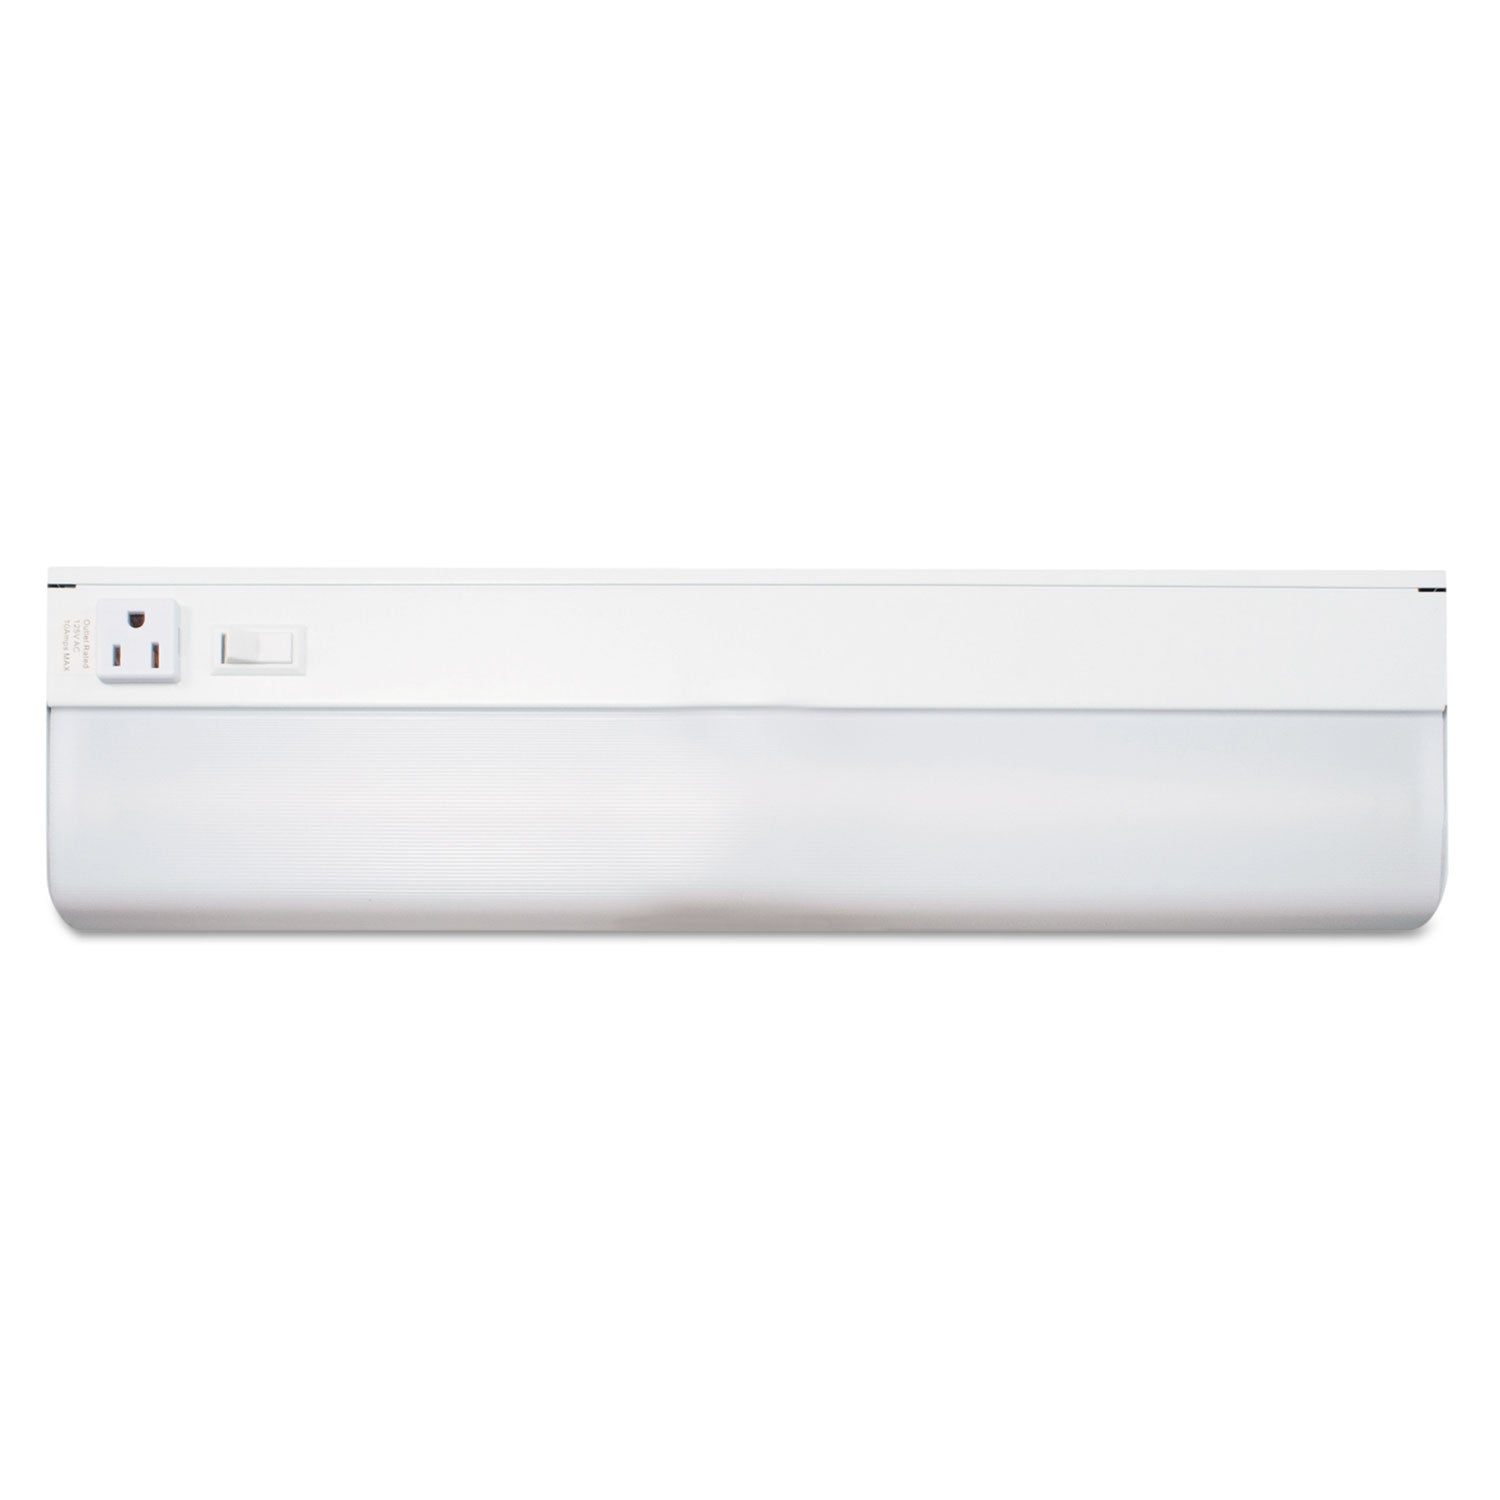 Low-Profile Under-Cabinet LED-Tube Light Fixture with (1) 9 W LED Tube, Steel Housing, 18.25" x 4" x 1.75", White - 